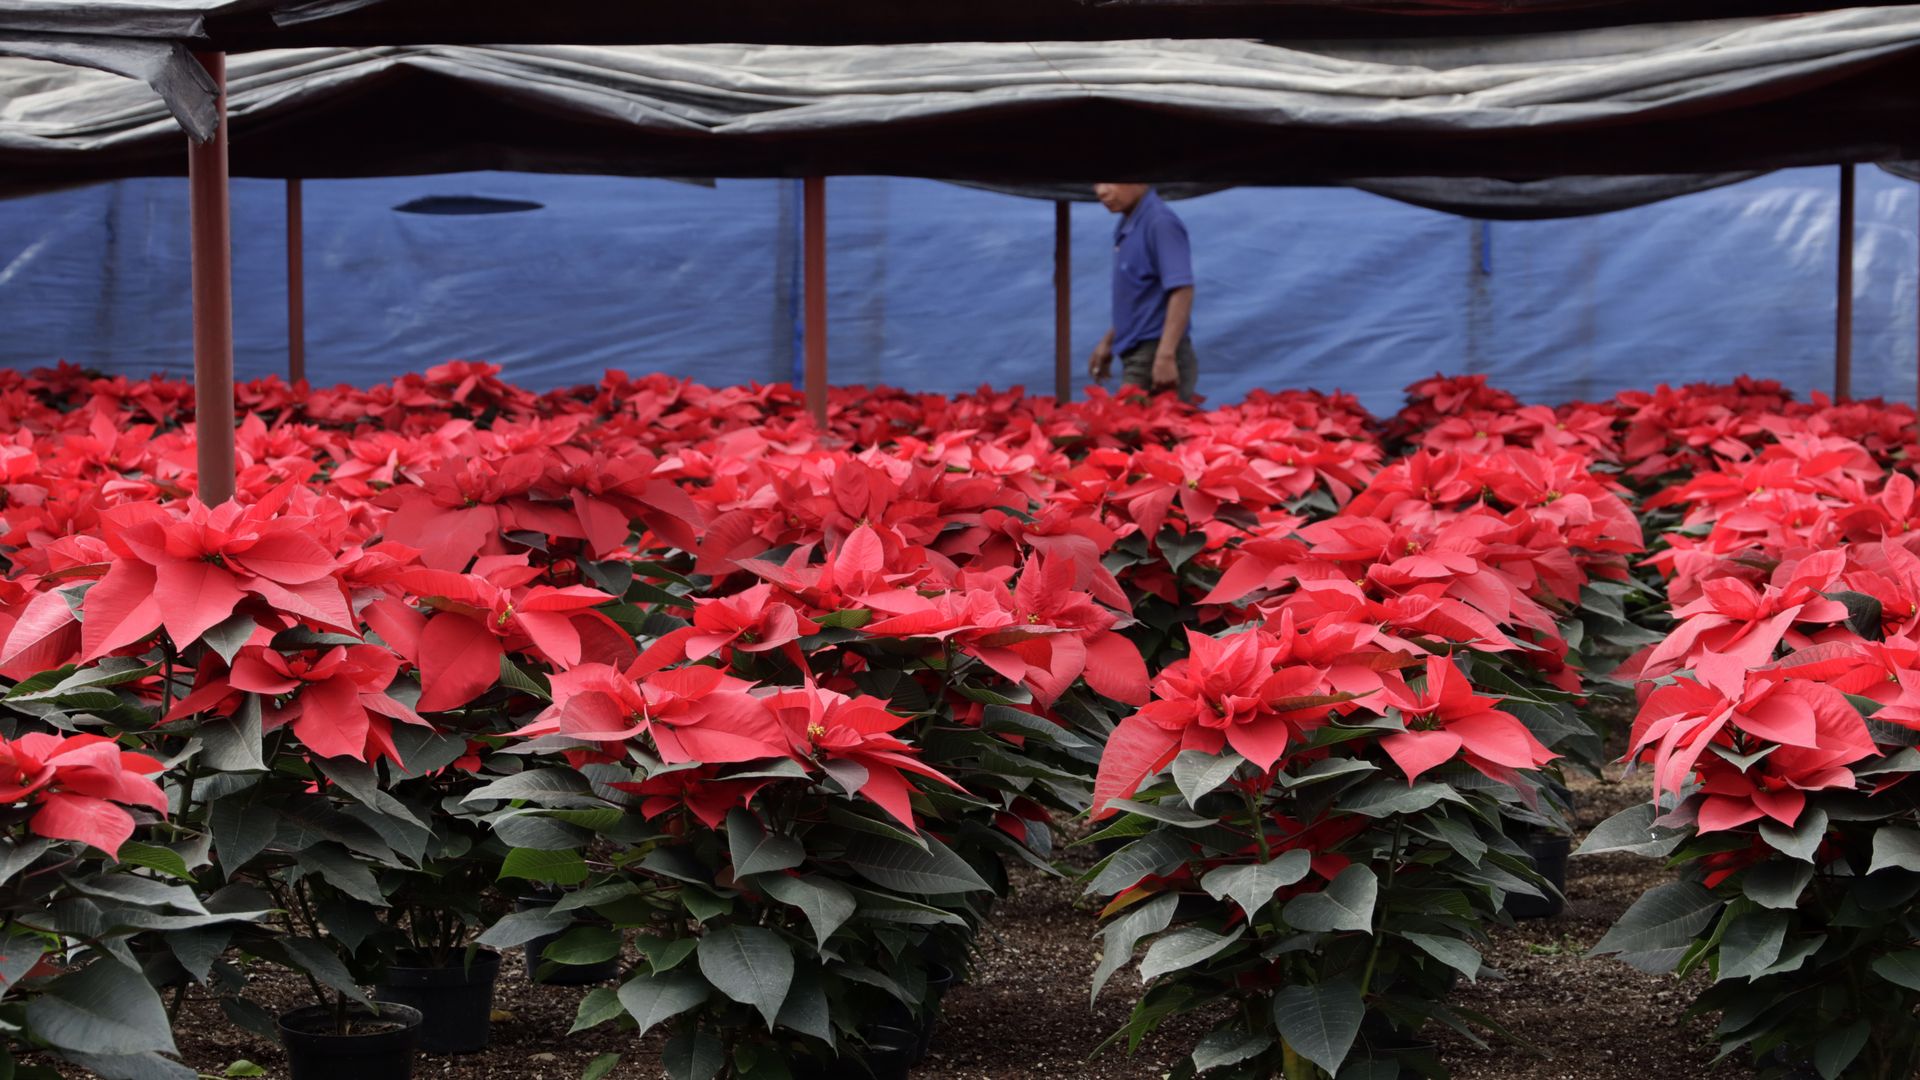 rows of red poinsettia flowers sit under a tarp